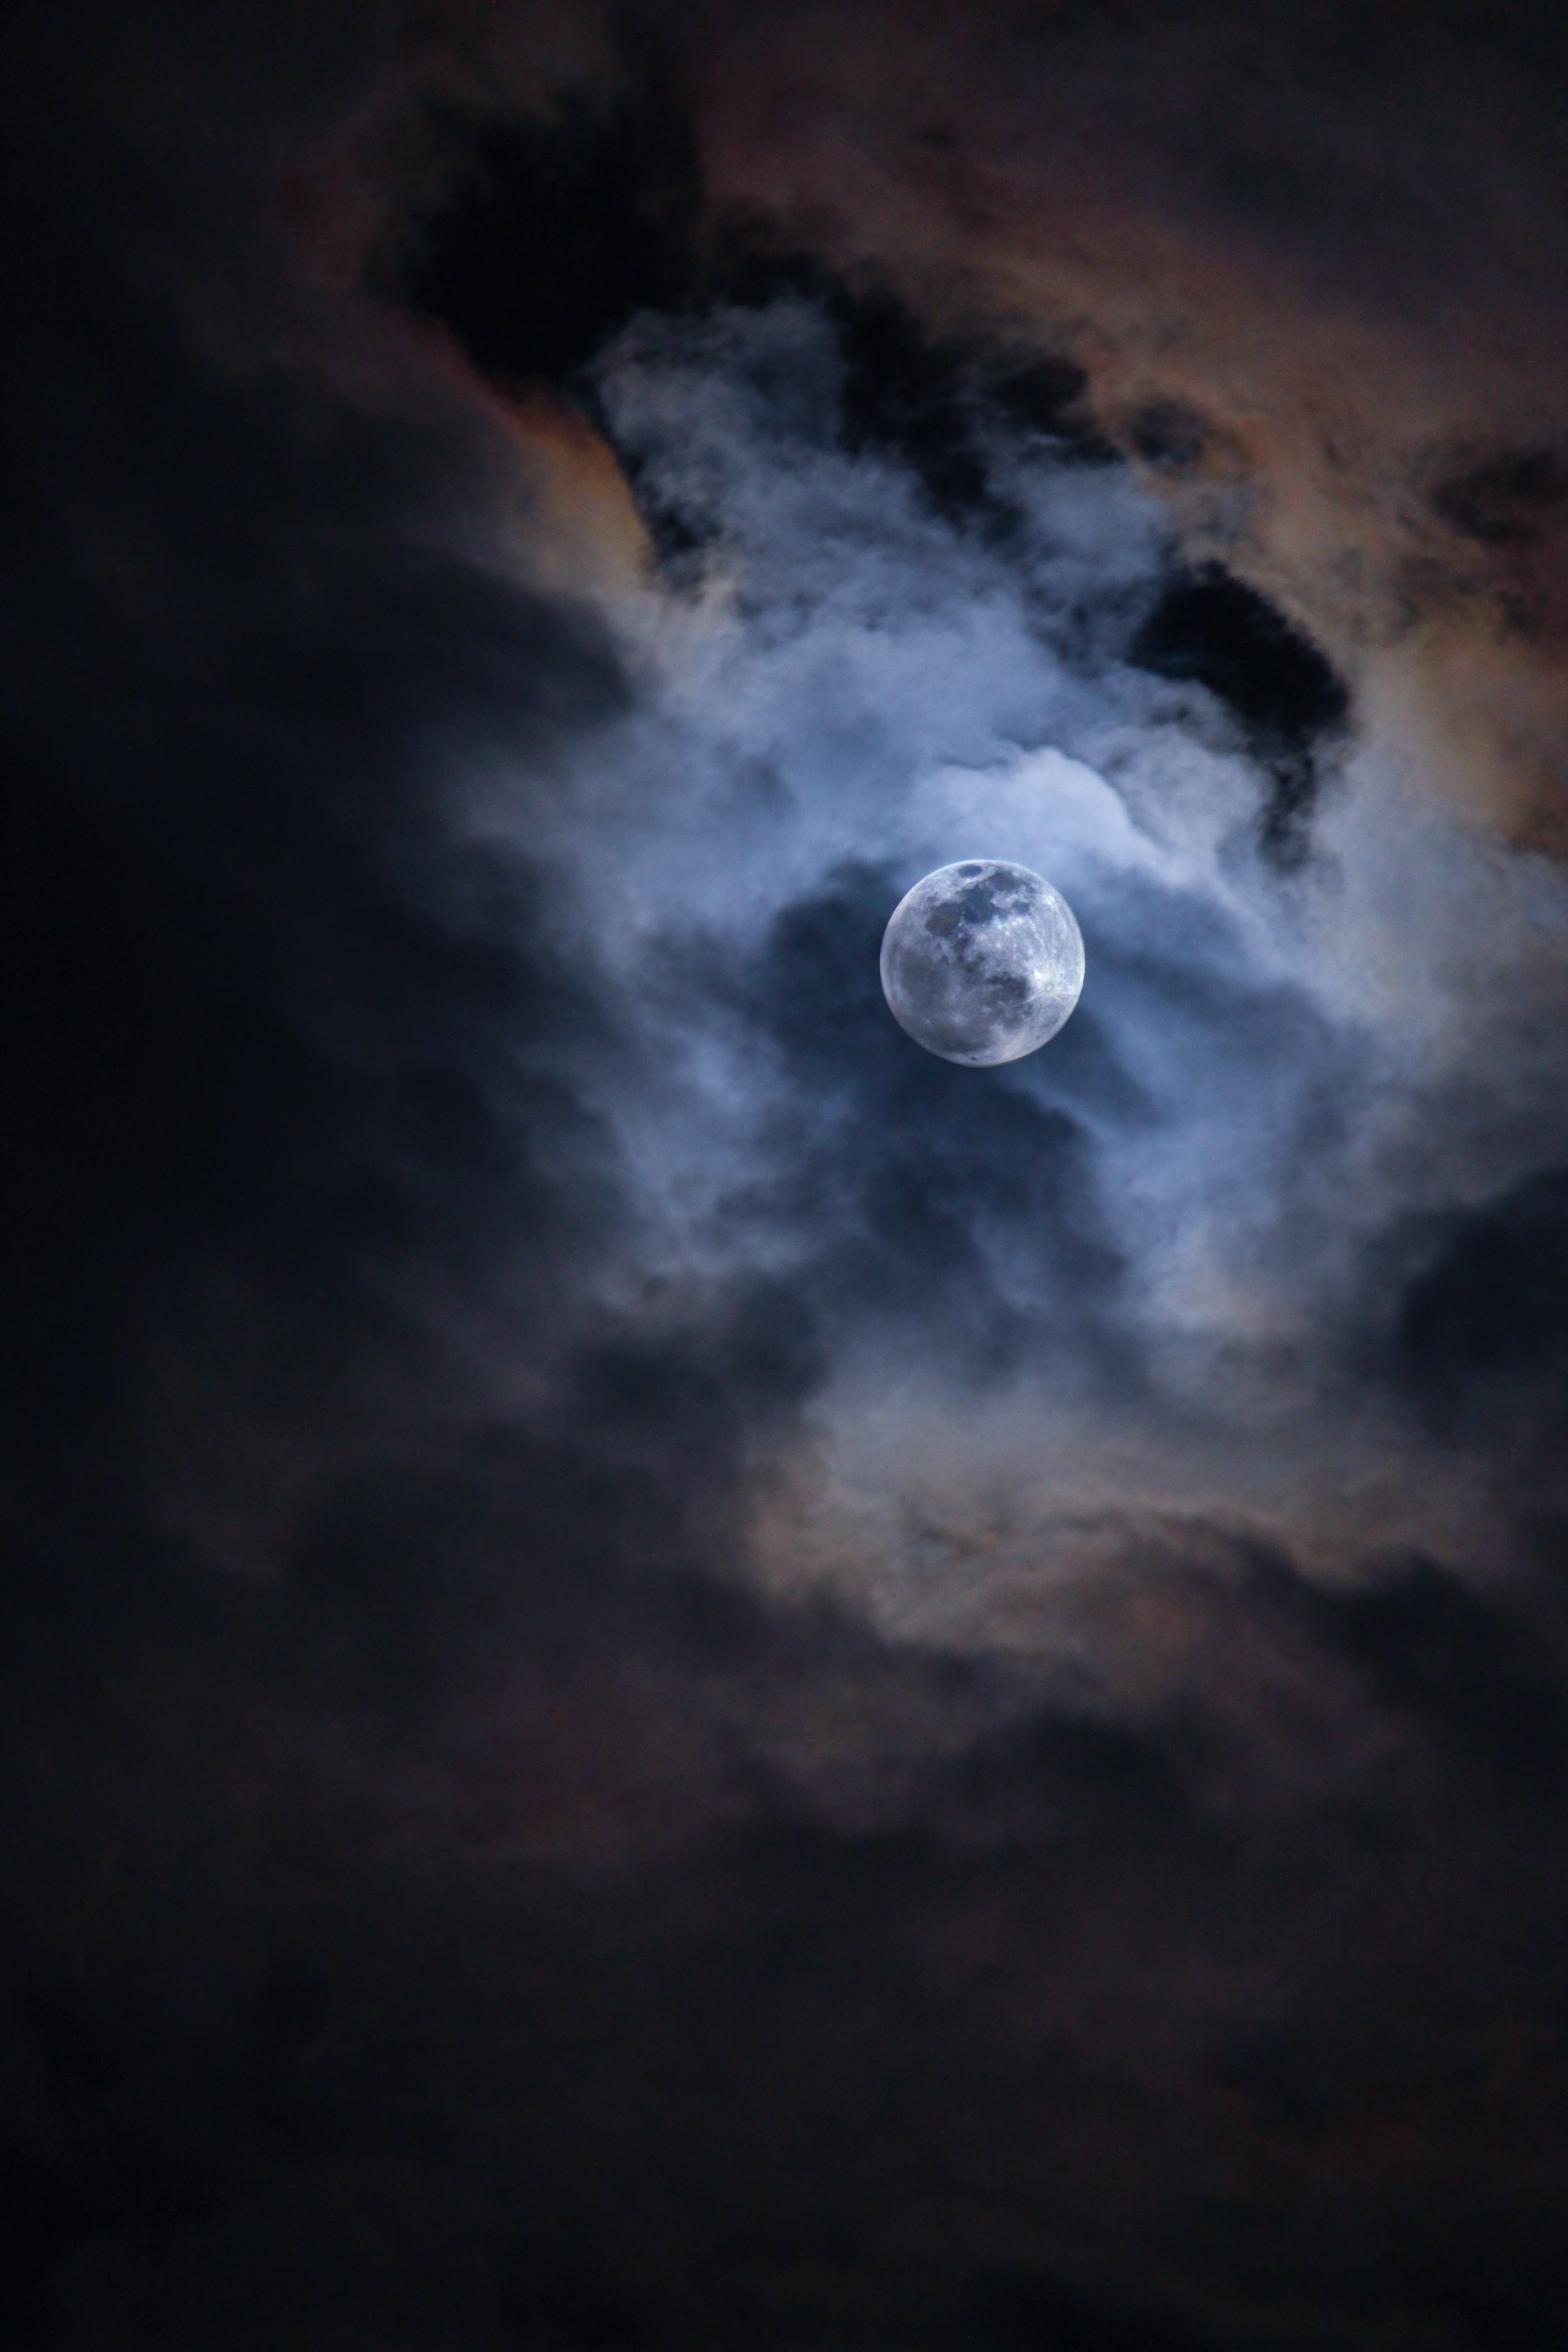 moon, nature, sky, night, clouds, shine, light wallpaper for mobile